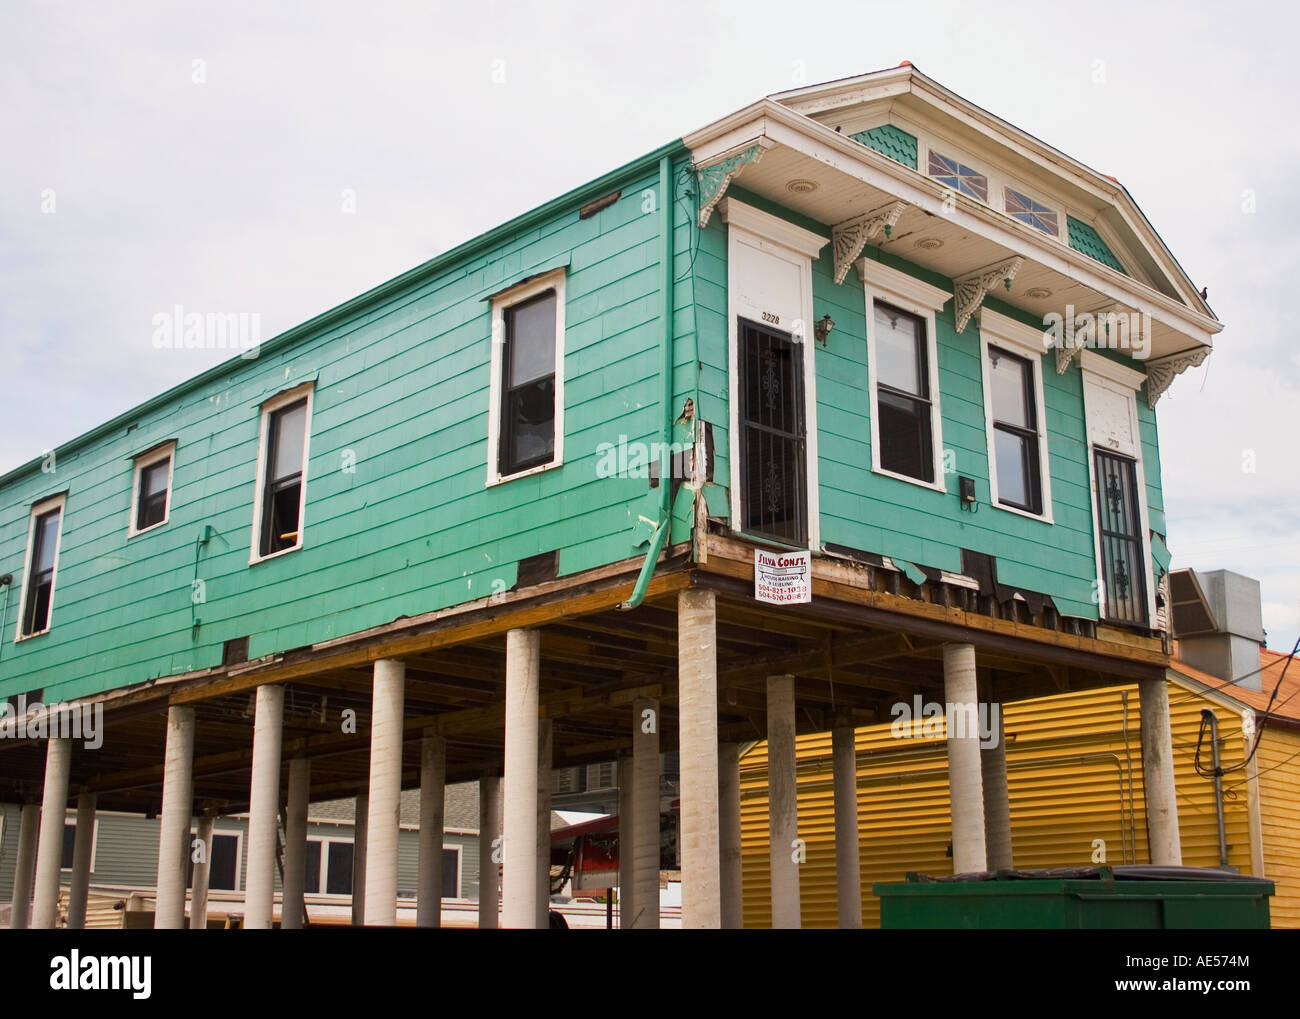 New Orleans shotgun cottage raised on fifteen foot piers two years after hurricane Katrina.  August, 2007. Stock Photo